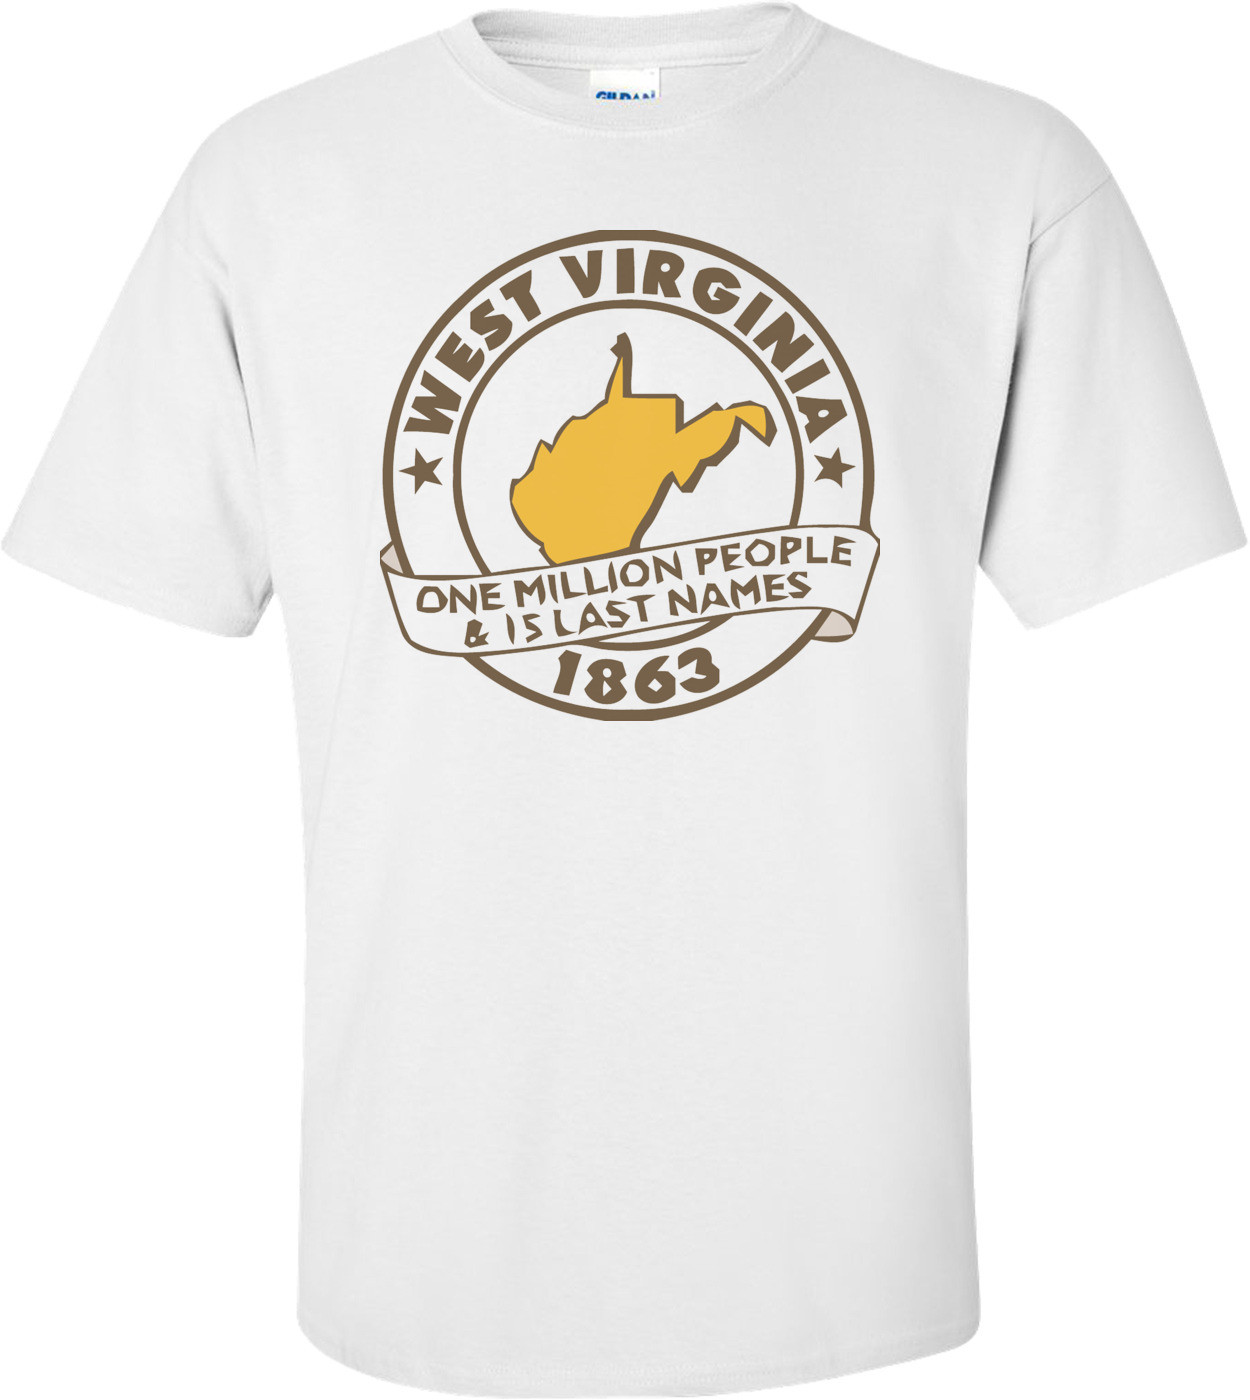 West Virginia, One Million People And 15 Last Names T-shirt